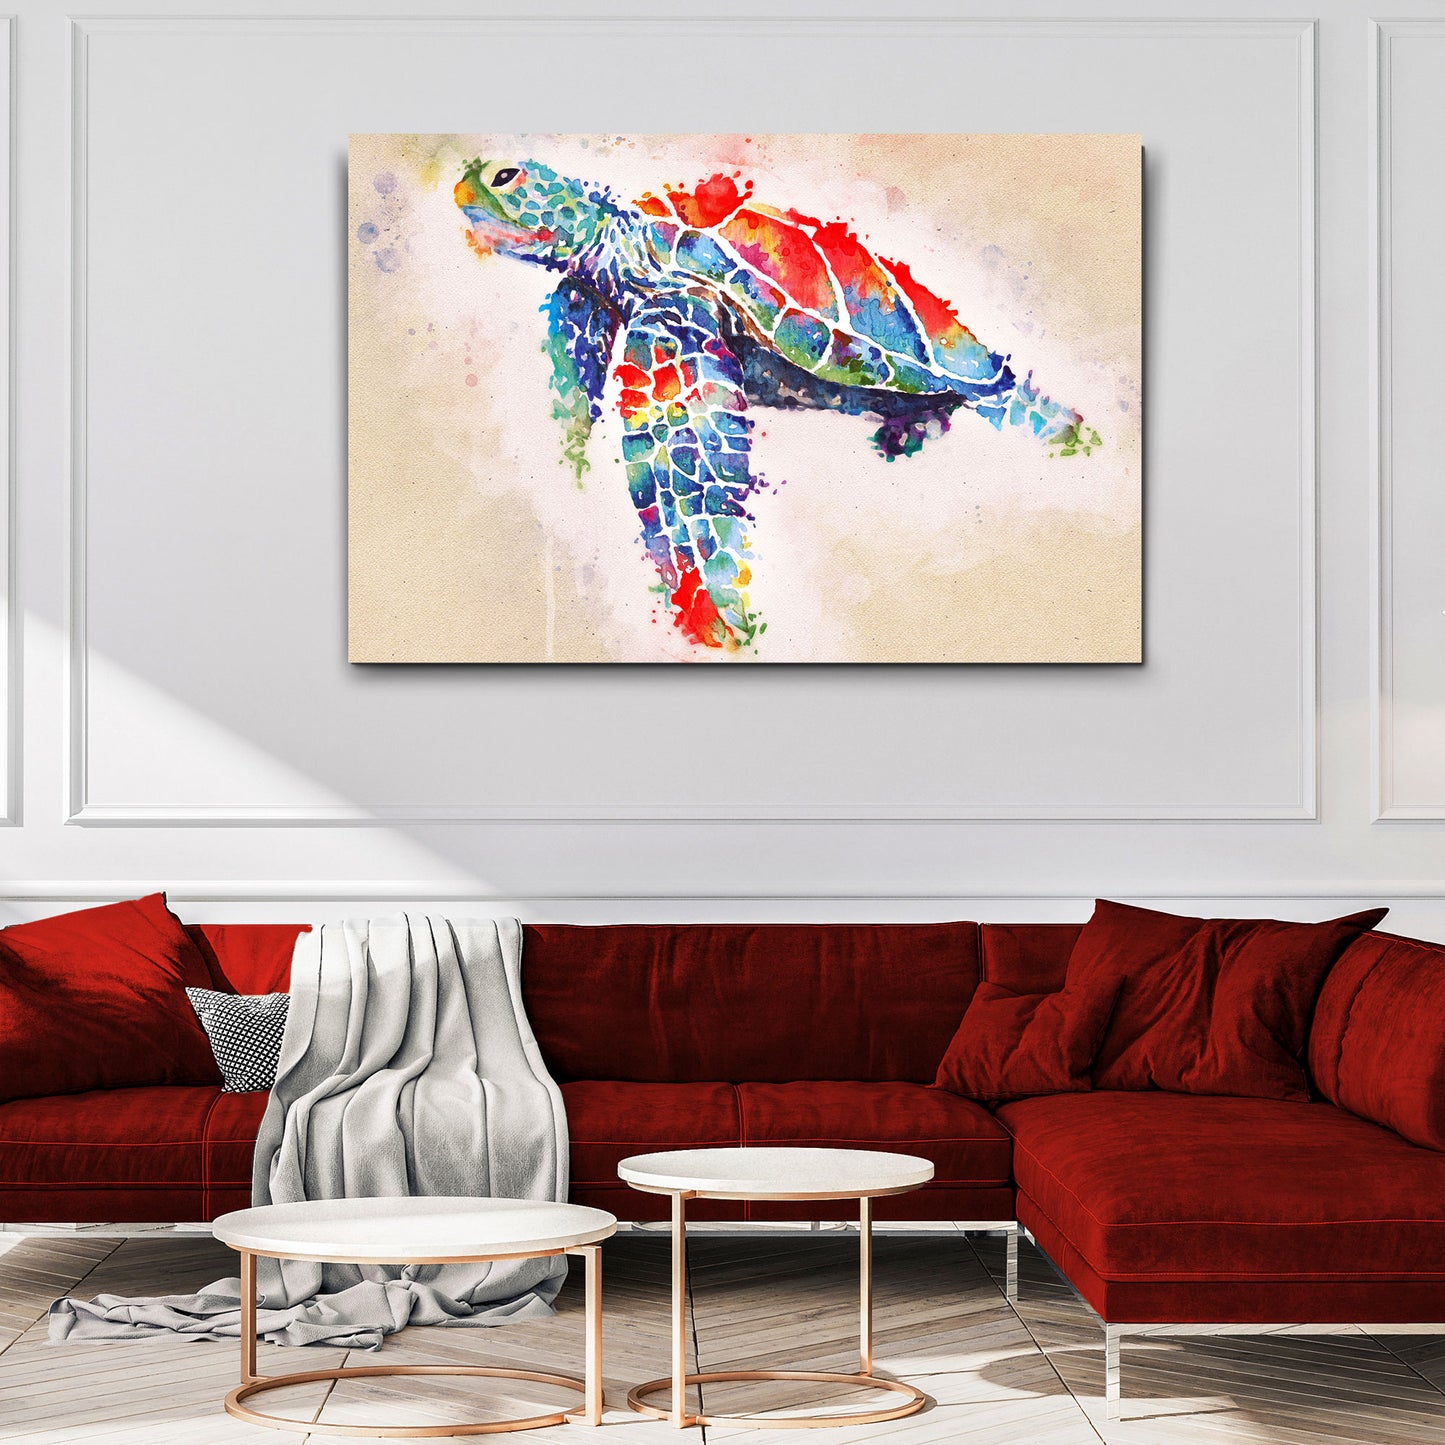 Coral Reef Sea Turtle Watercolor Canvas Wall Art - Image by Tailored Canvases